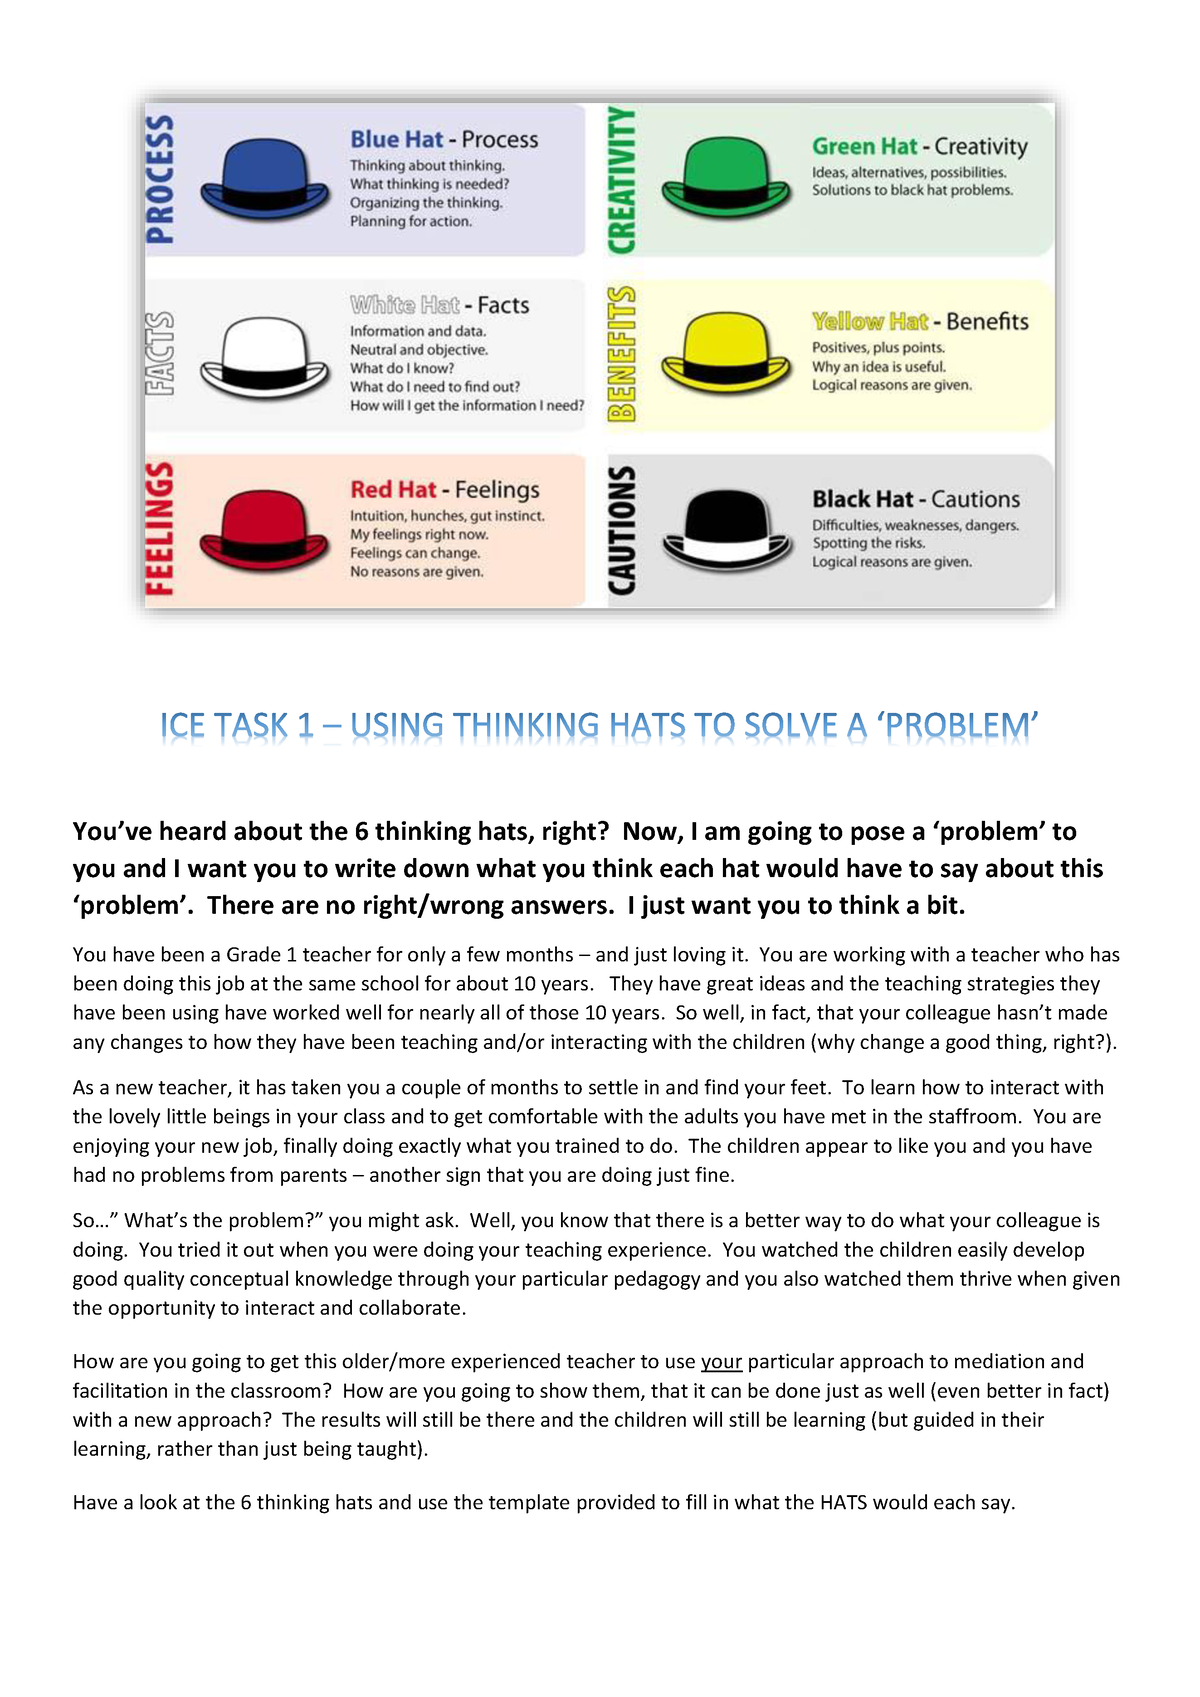 ICE TASK 1 Problem Solving Using THE Thinking HATS - You9ve heard about ...